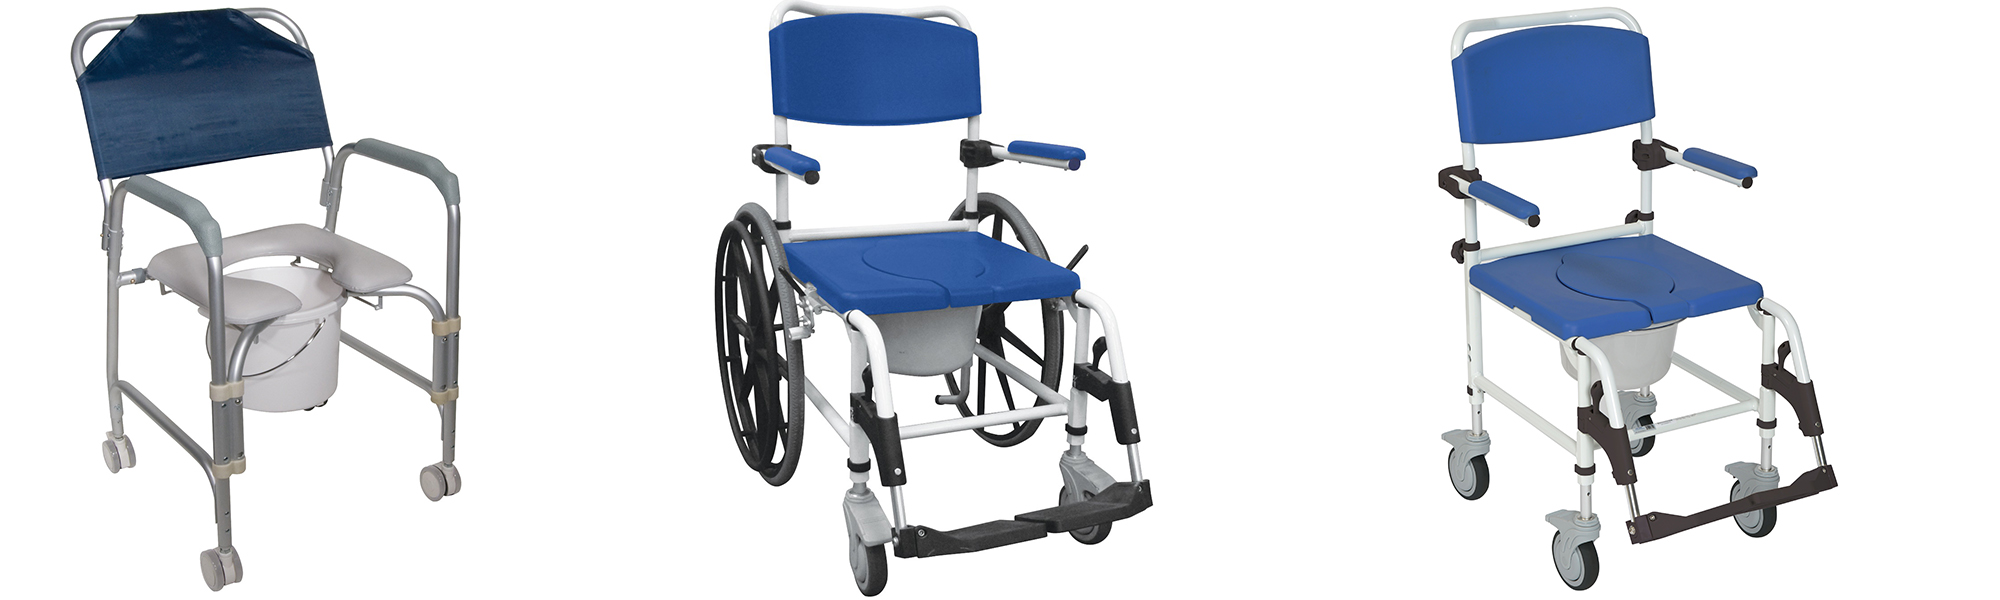 Shower Chair with Wheels